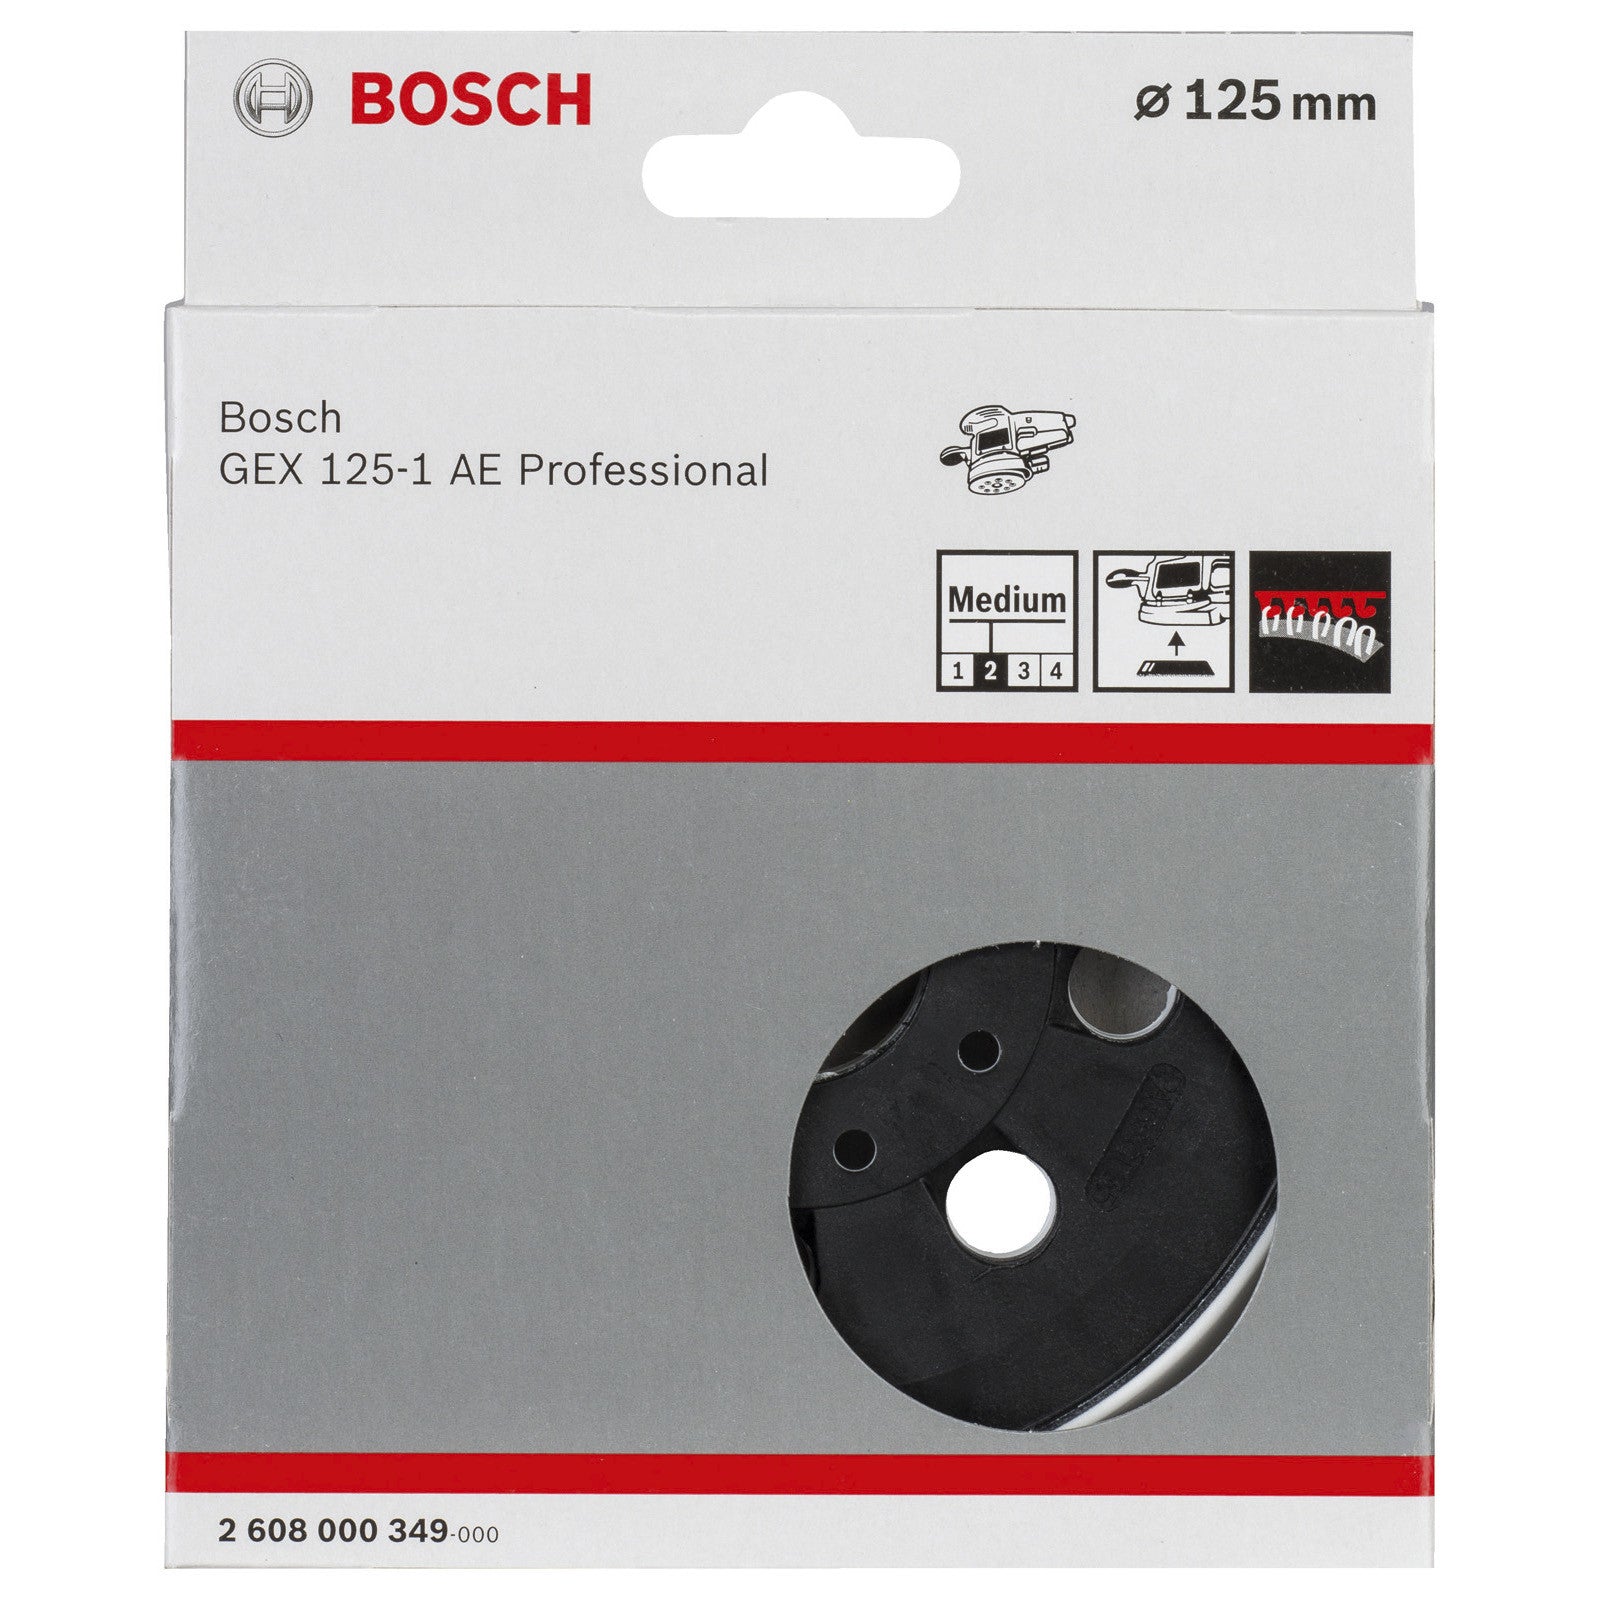 Bosch Medium Sanding Pad for GEX 125-1 AE 125 mm 2608000349 Power Tool Services